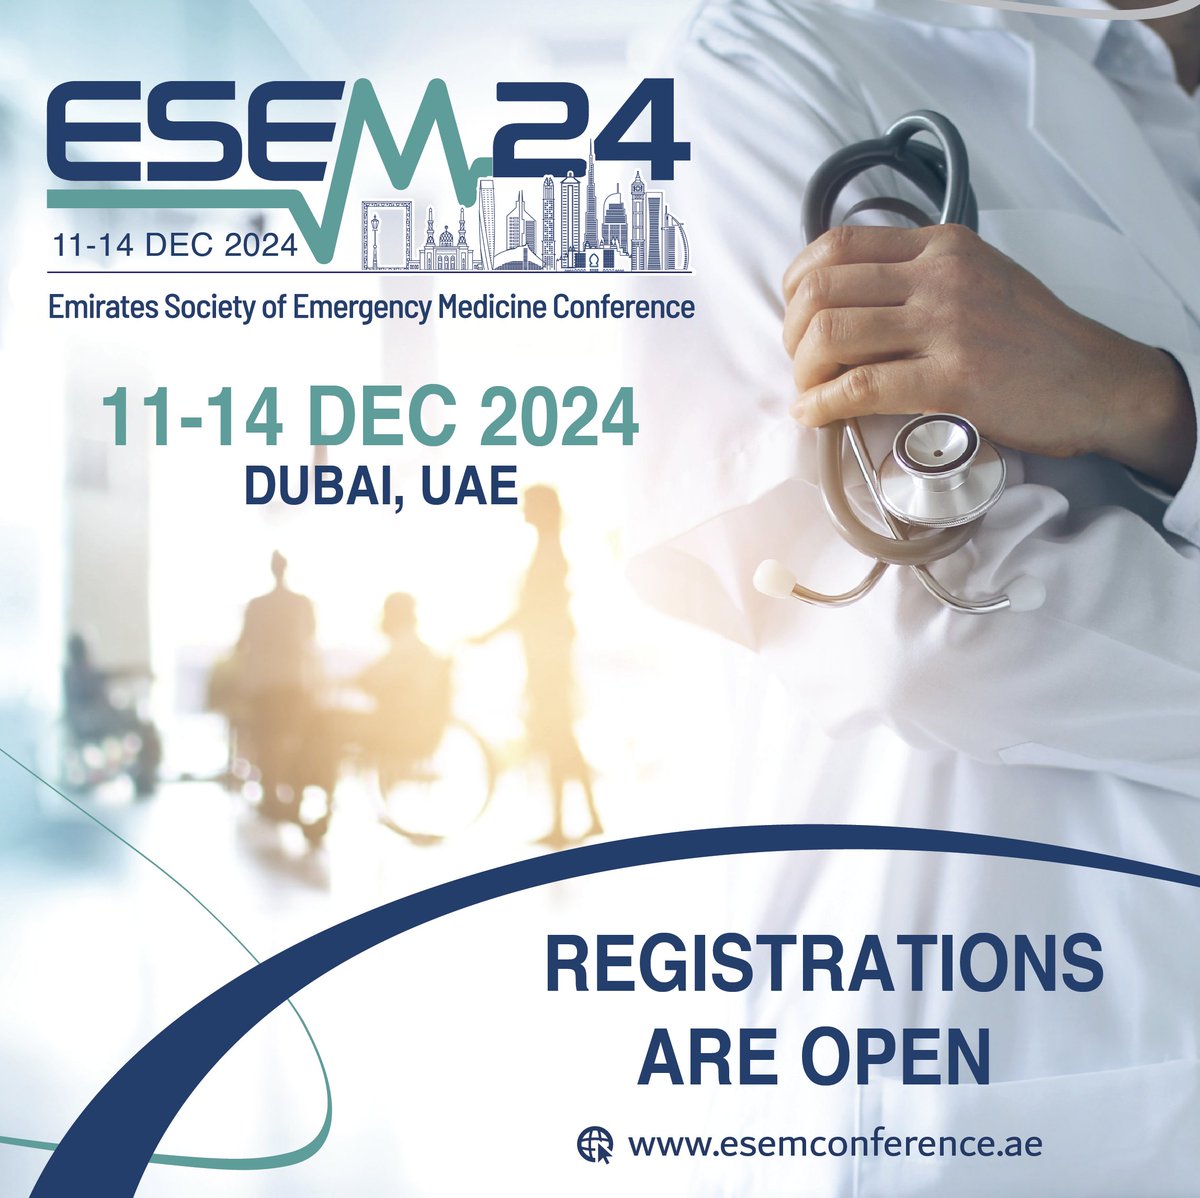 Exciting news! Registrations are now OPEN for #ESEM24!
Join us in Dubai for the premier emergency medicine conference of the year.  
Register here and secure your spot now: bit.ly/44iOy8x

#EmergencyMedicine #DubaiConference #MedicalAdvancements #GlobalHealthcare